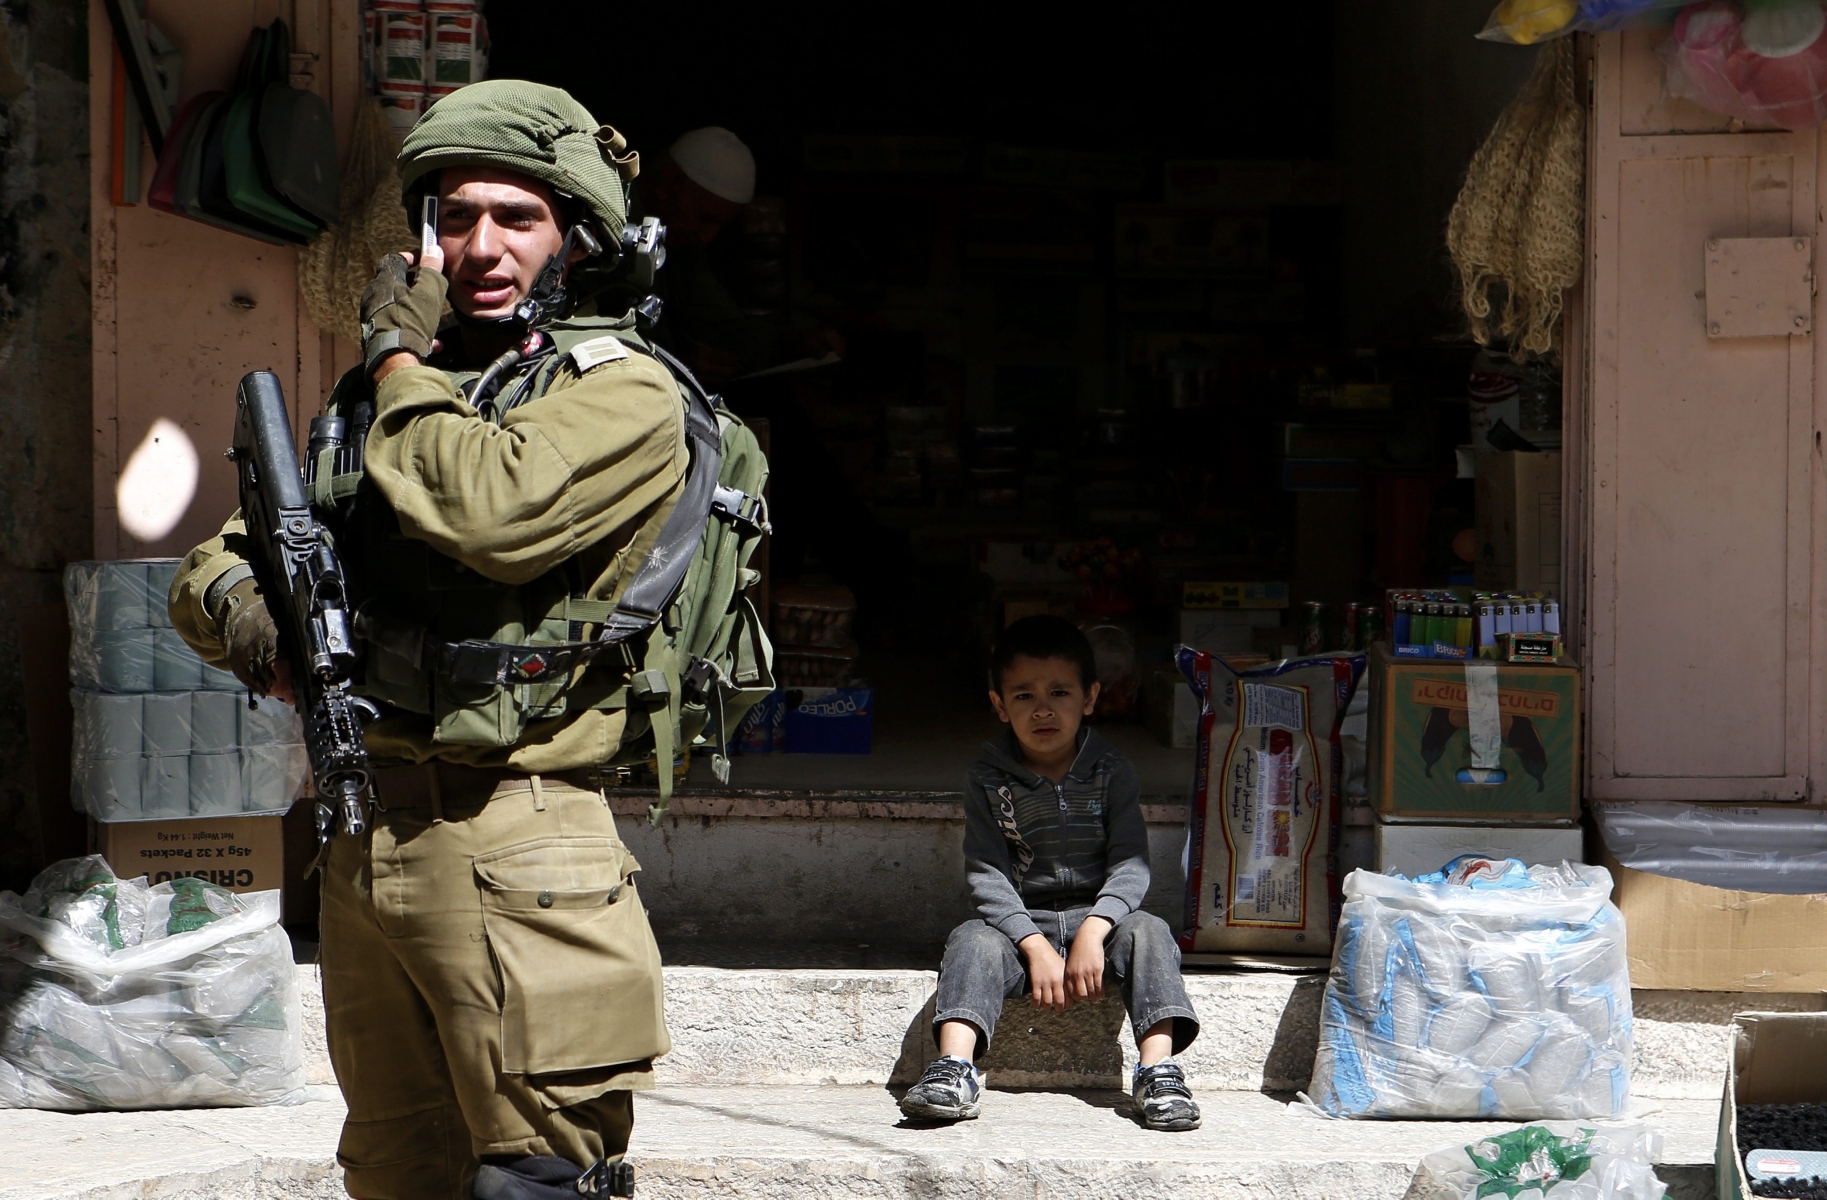 epa05294307 Israeli soldiers on patrol in the Old City in the Old City of Hebron on the West Bank, 08 May 2016.  EPA/ABED AL HASHLAMOUN MIDEAST PALESTINIANS ISRAEL CONFLICT